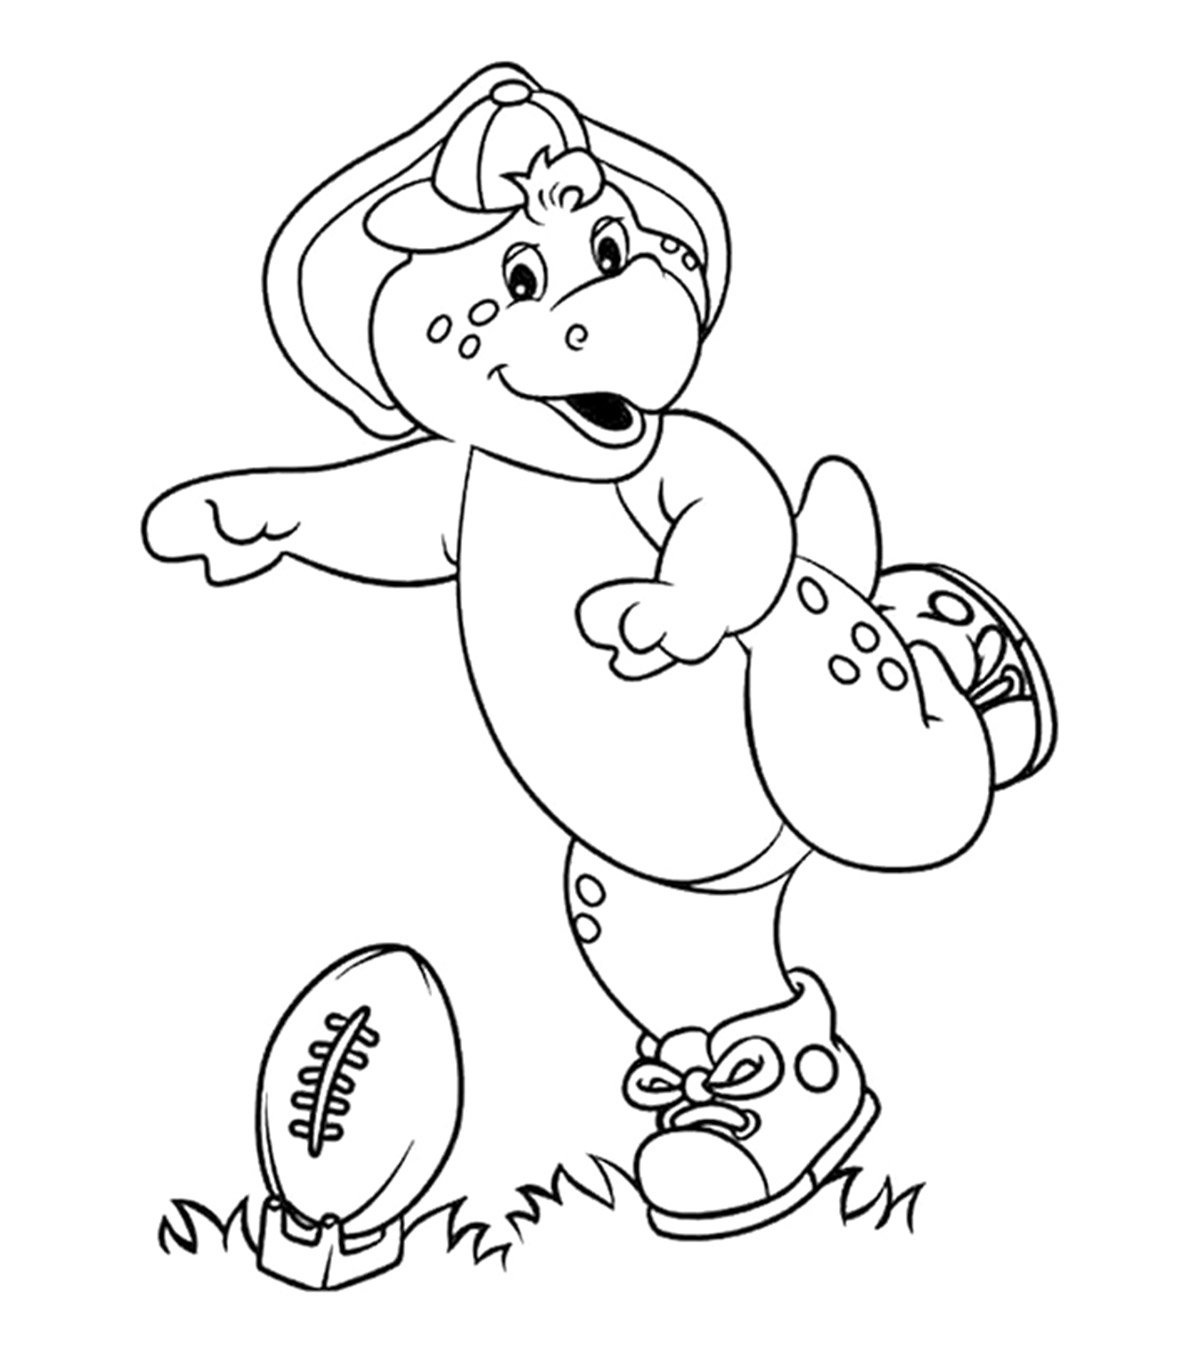 Top 10 Free Printable Barney Coloring Pages Online